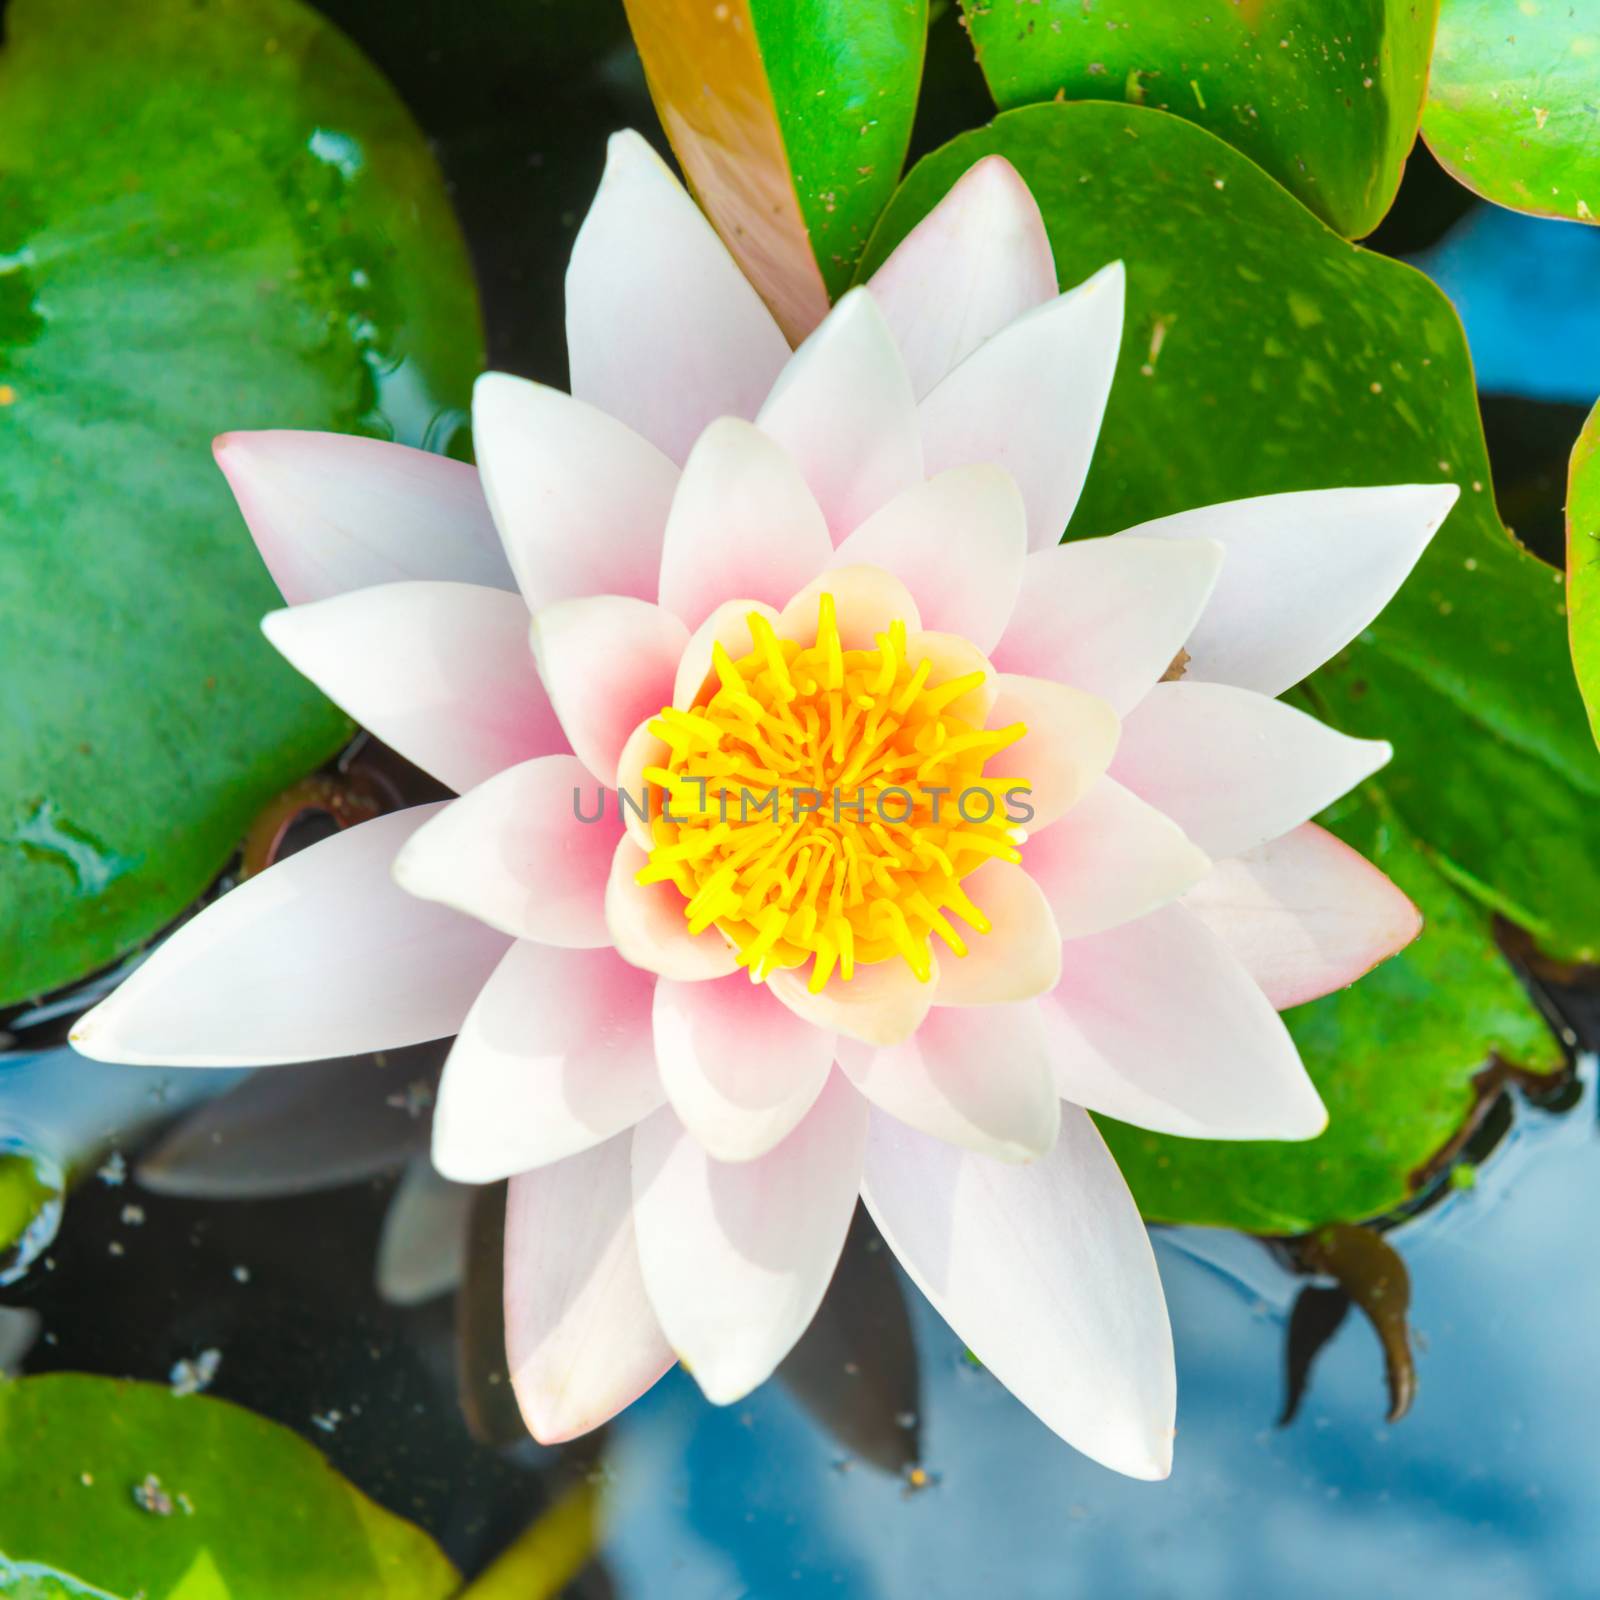 White flower- water lilly with green leaves on the pond